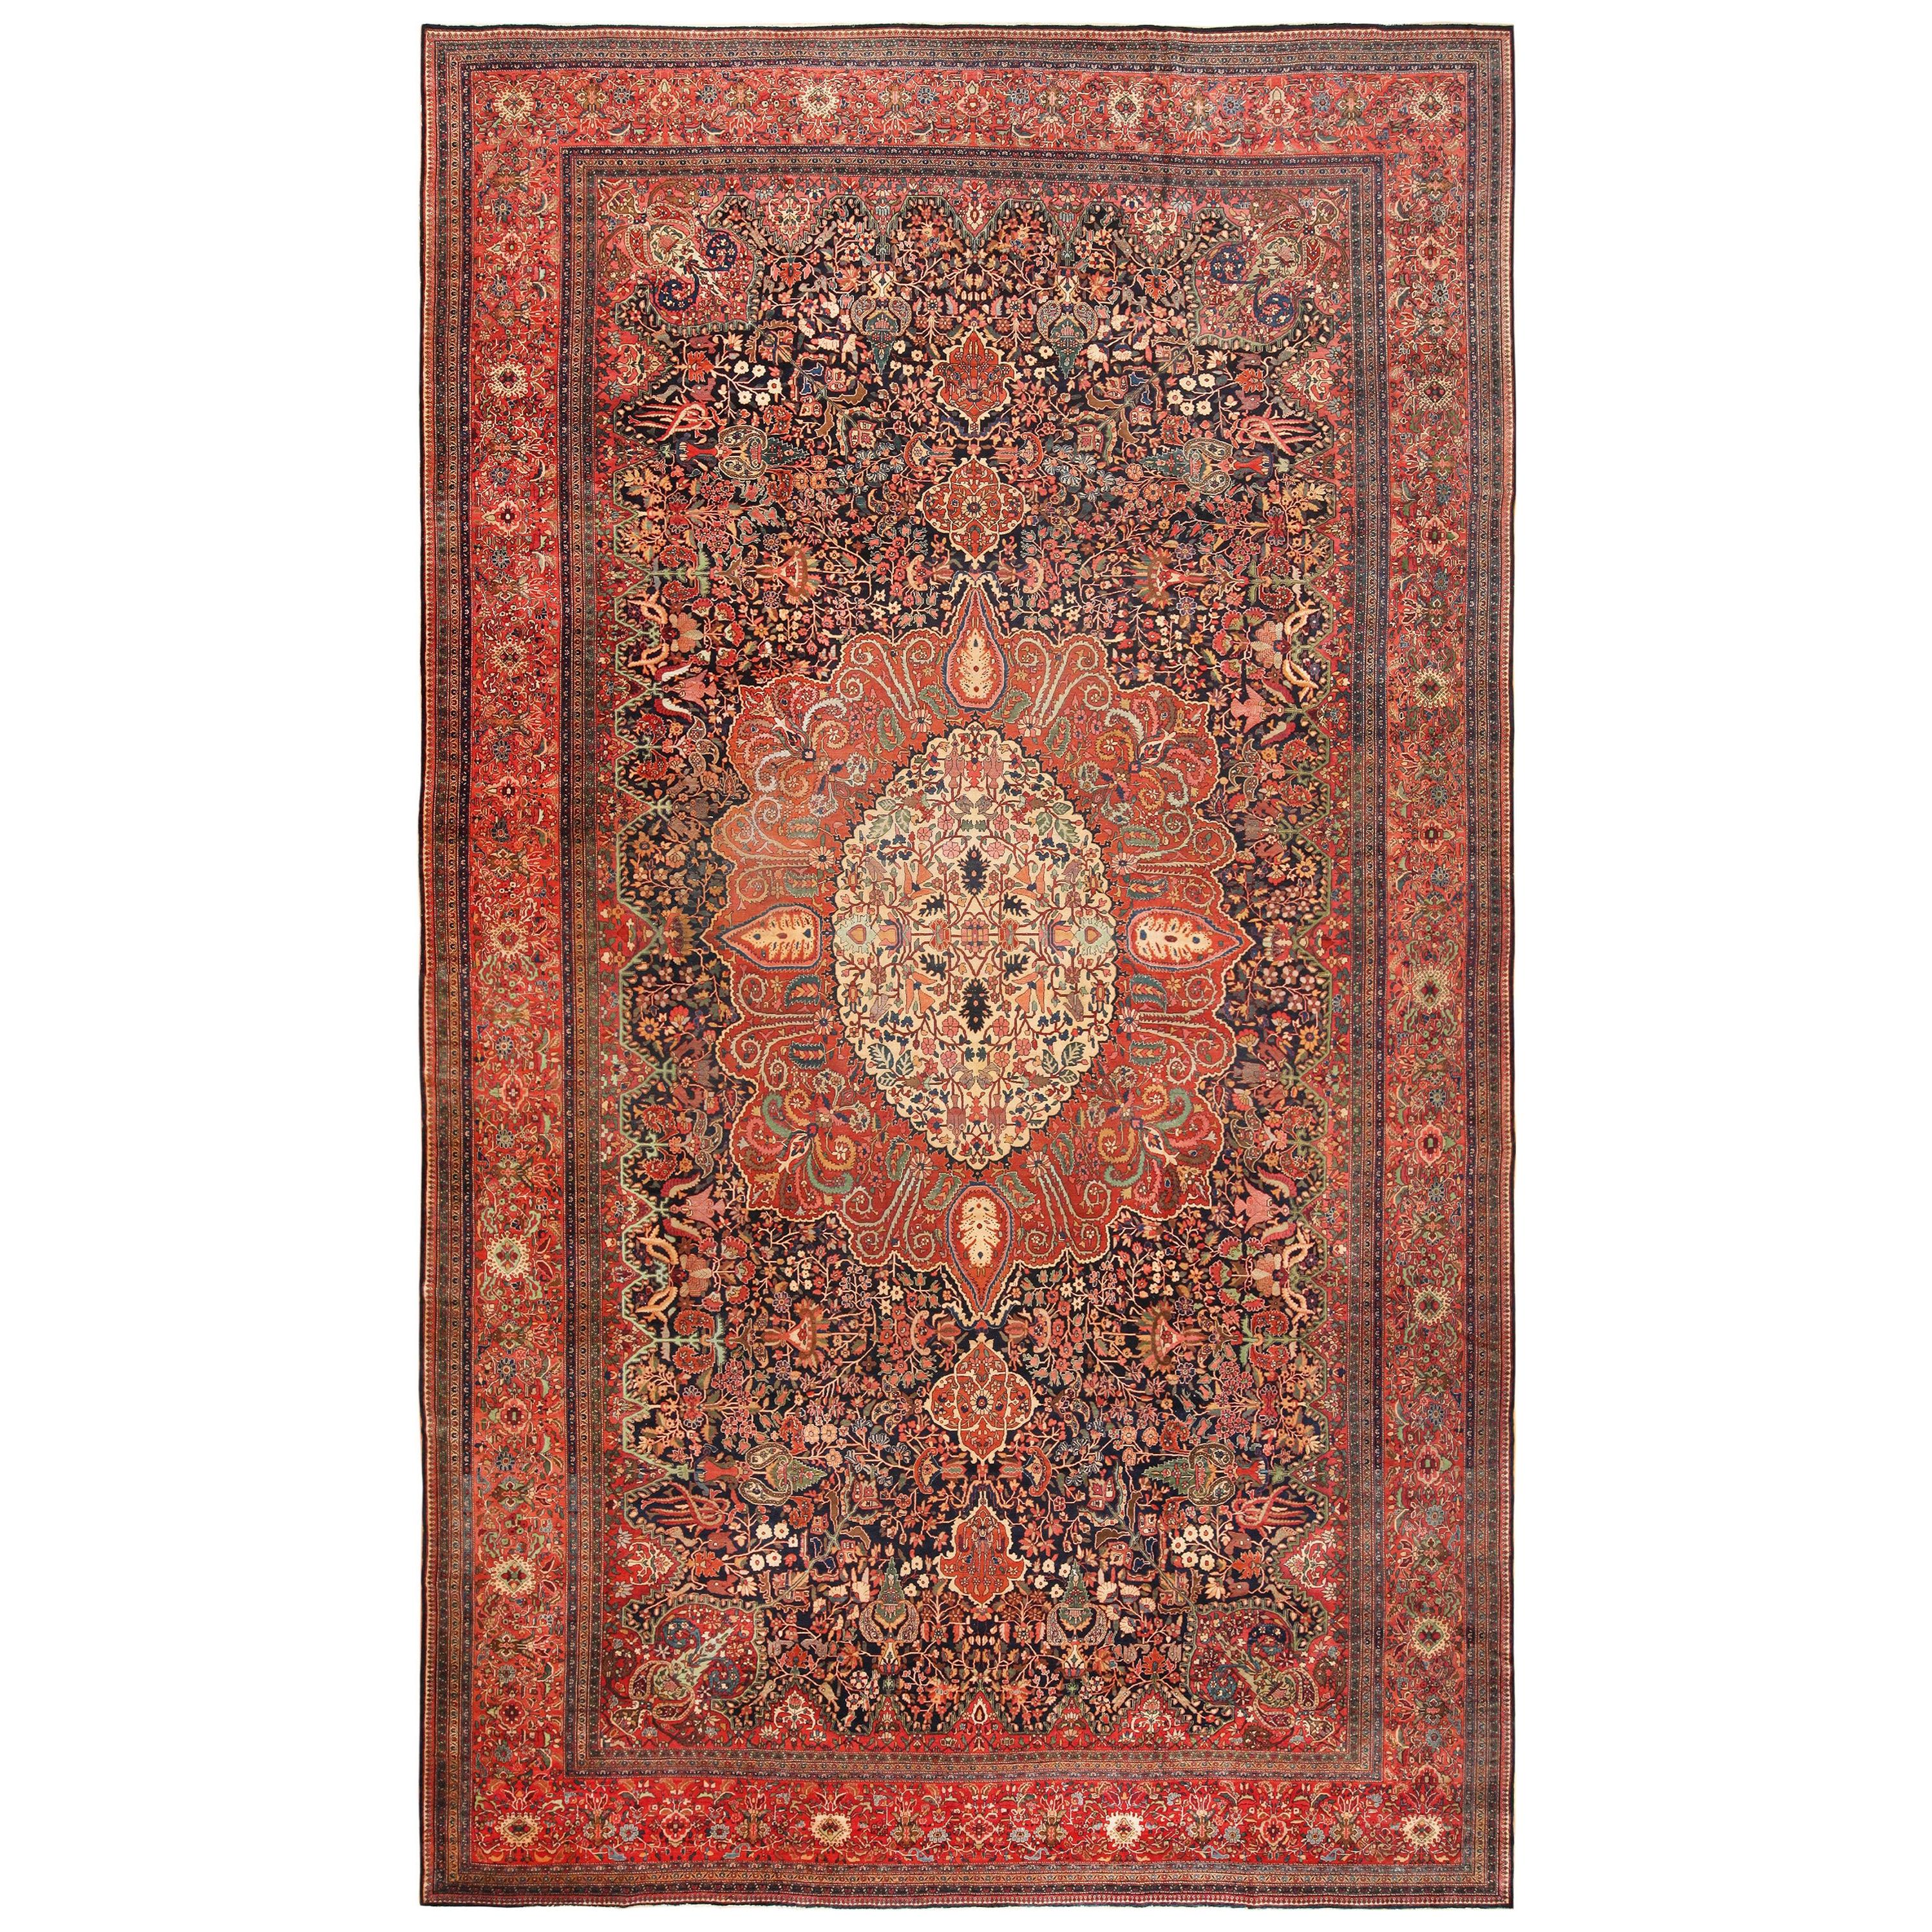 Antique Persian Sarouk Farahan Rug. Size: 13 ft 4 in x 23 ft 10 in